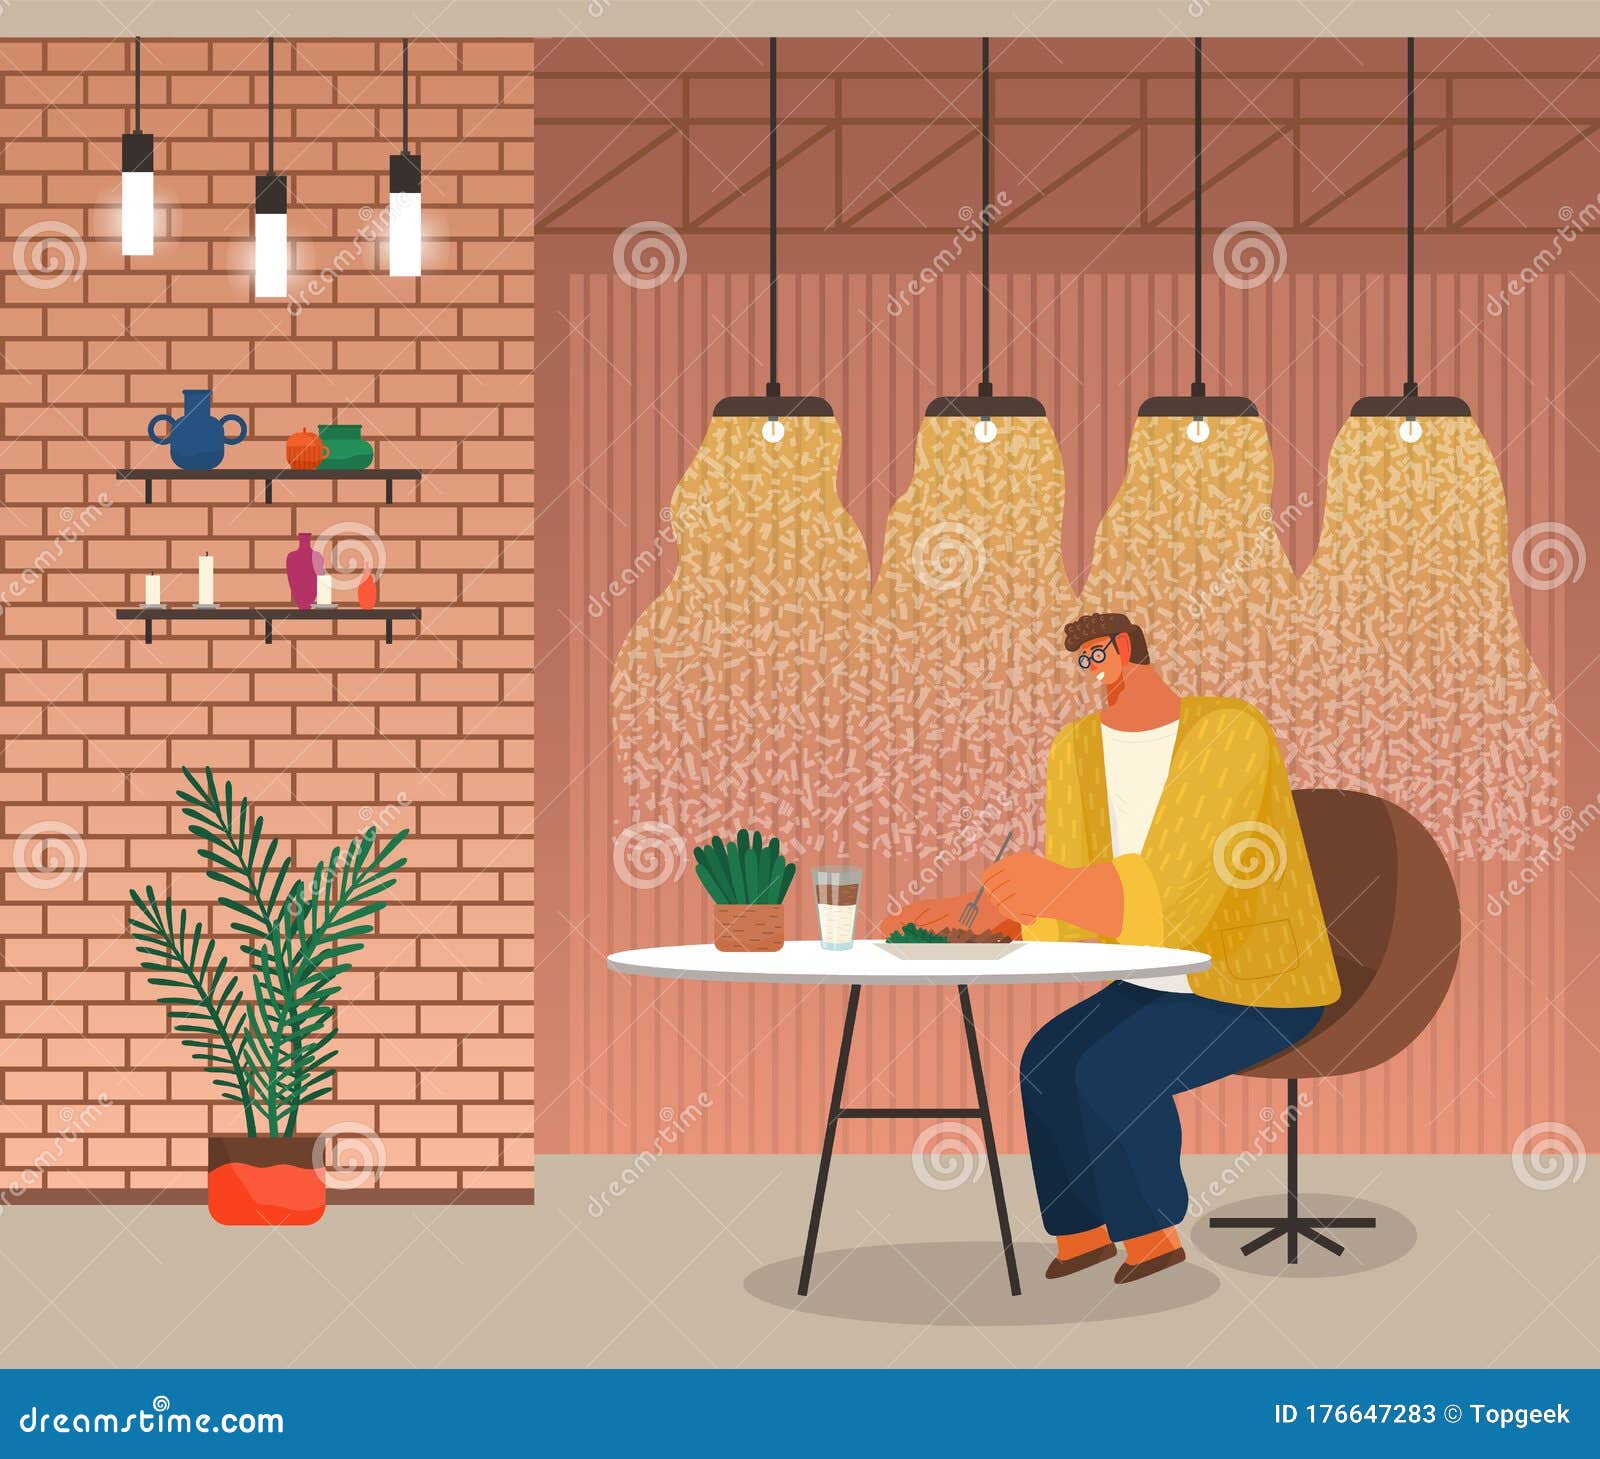 Alone Cafe Stock Illustrations 485 Alone Cafe Stock Illustrations Vectors Clipart Dreamstime